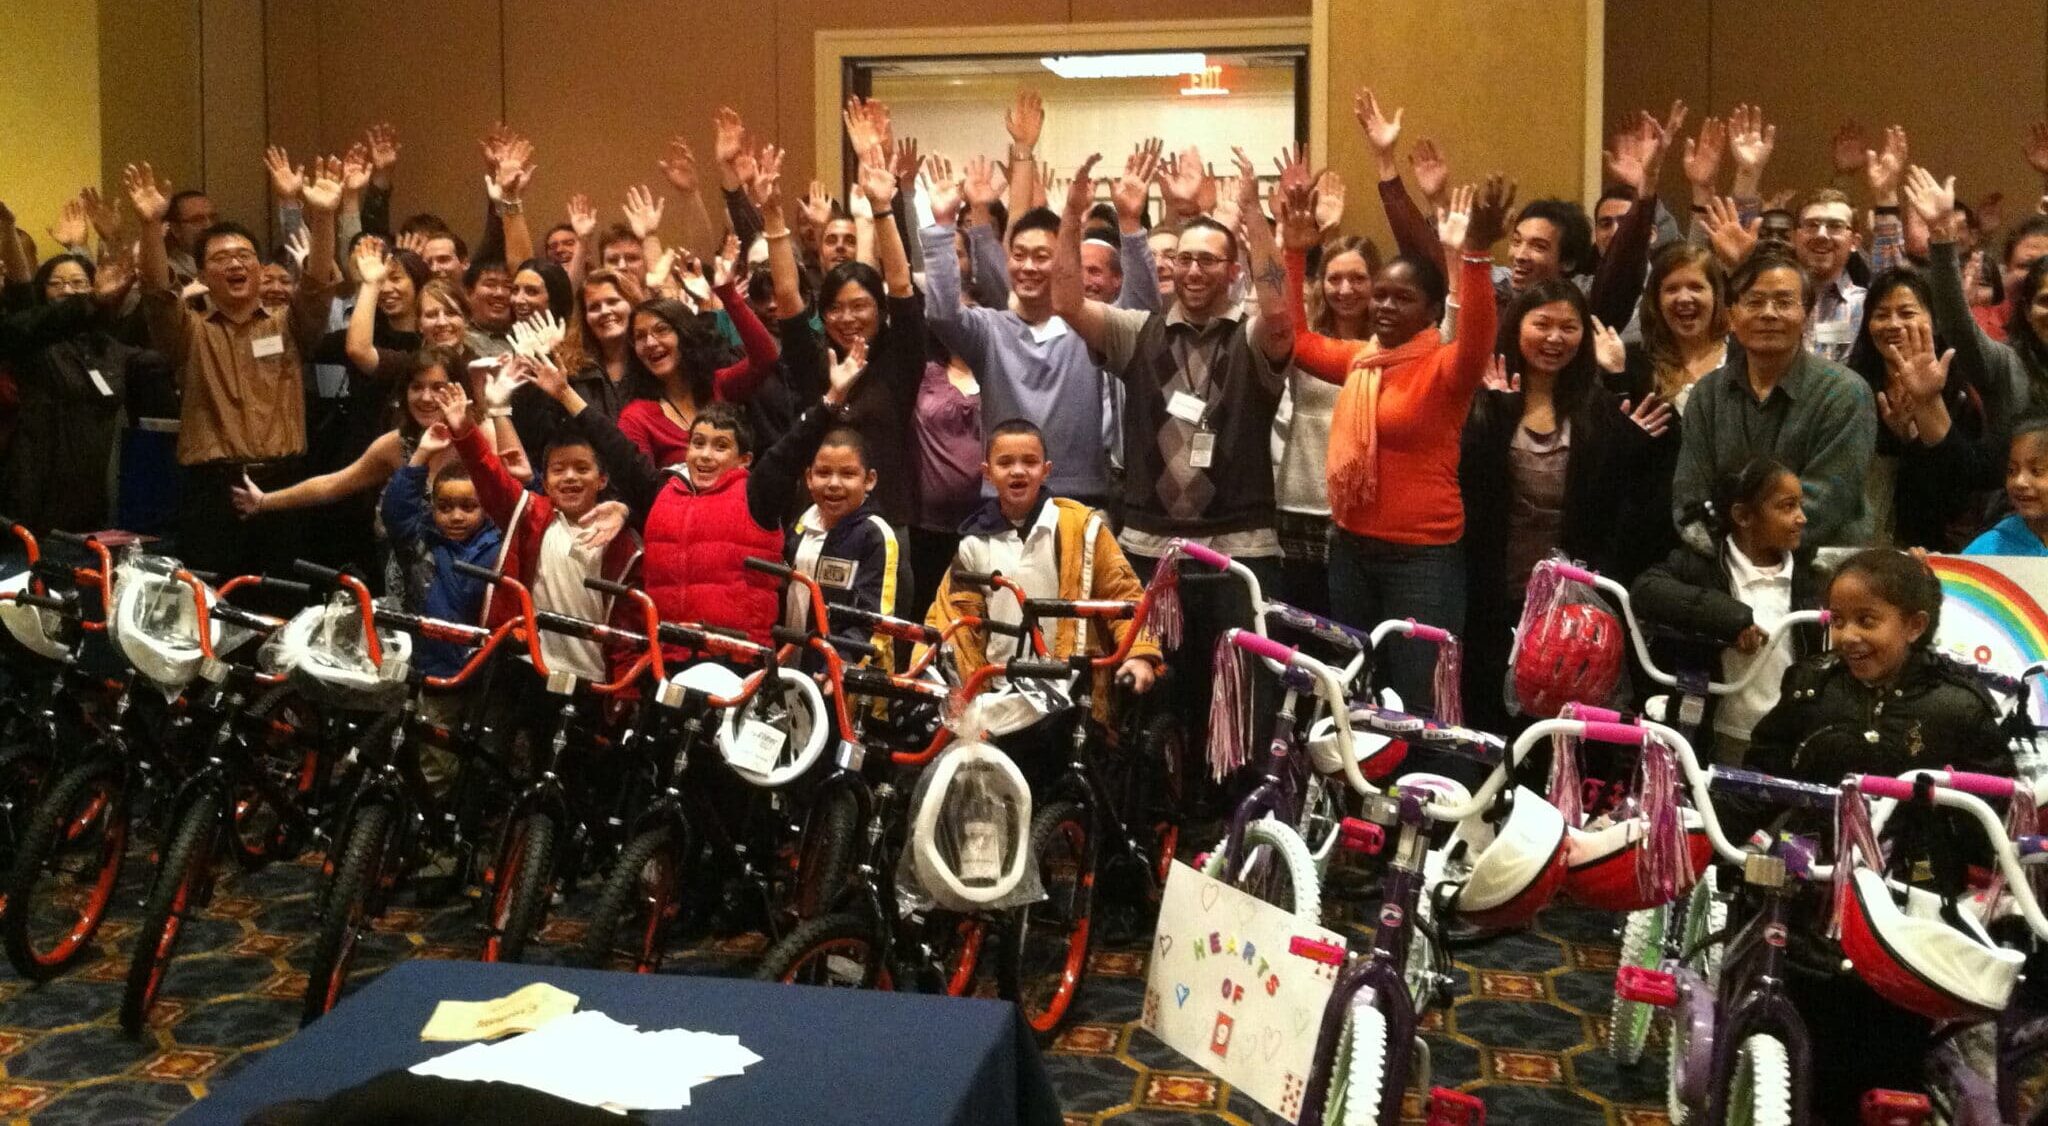 Prudential Bicycle Team Building Event in New Jersey